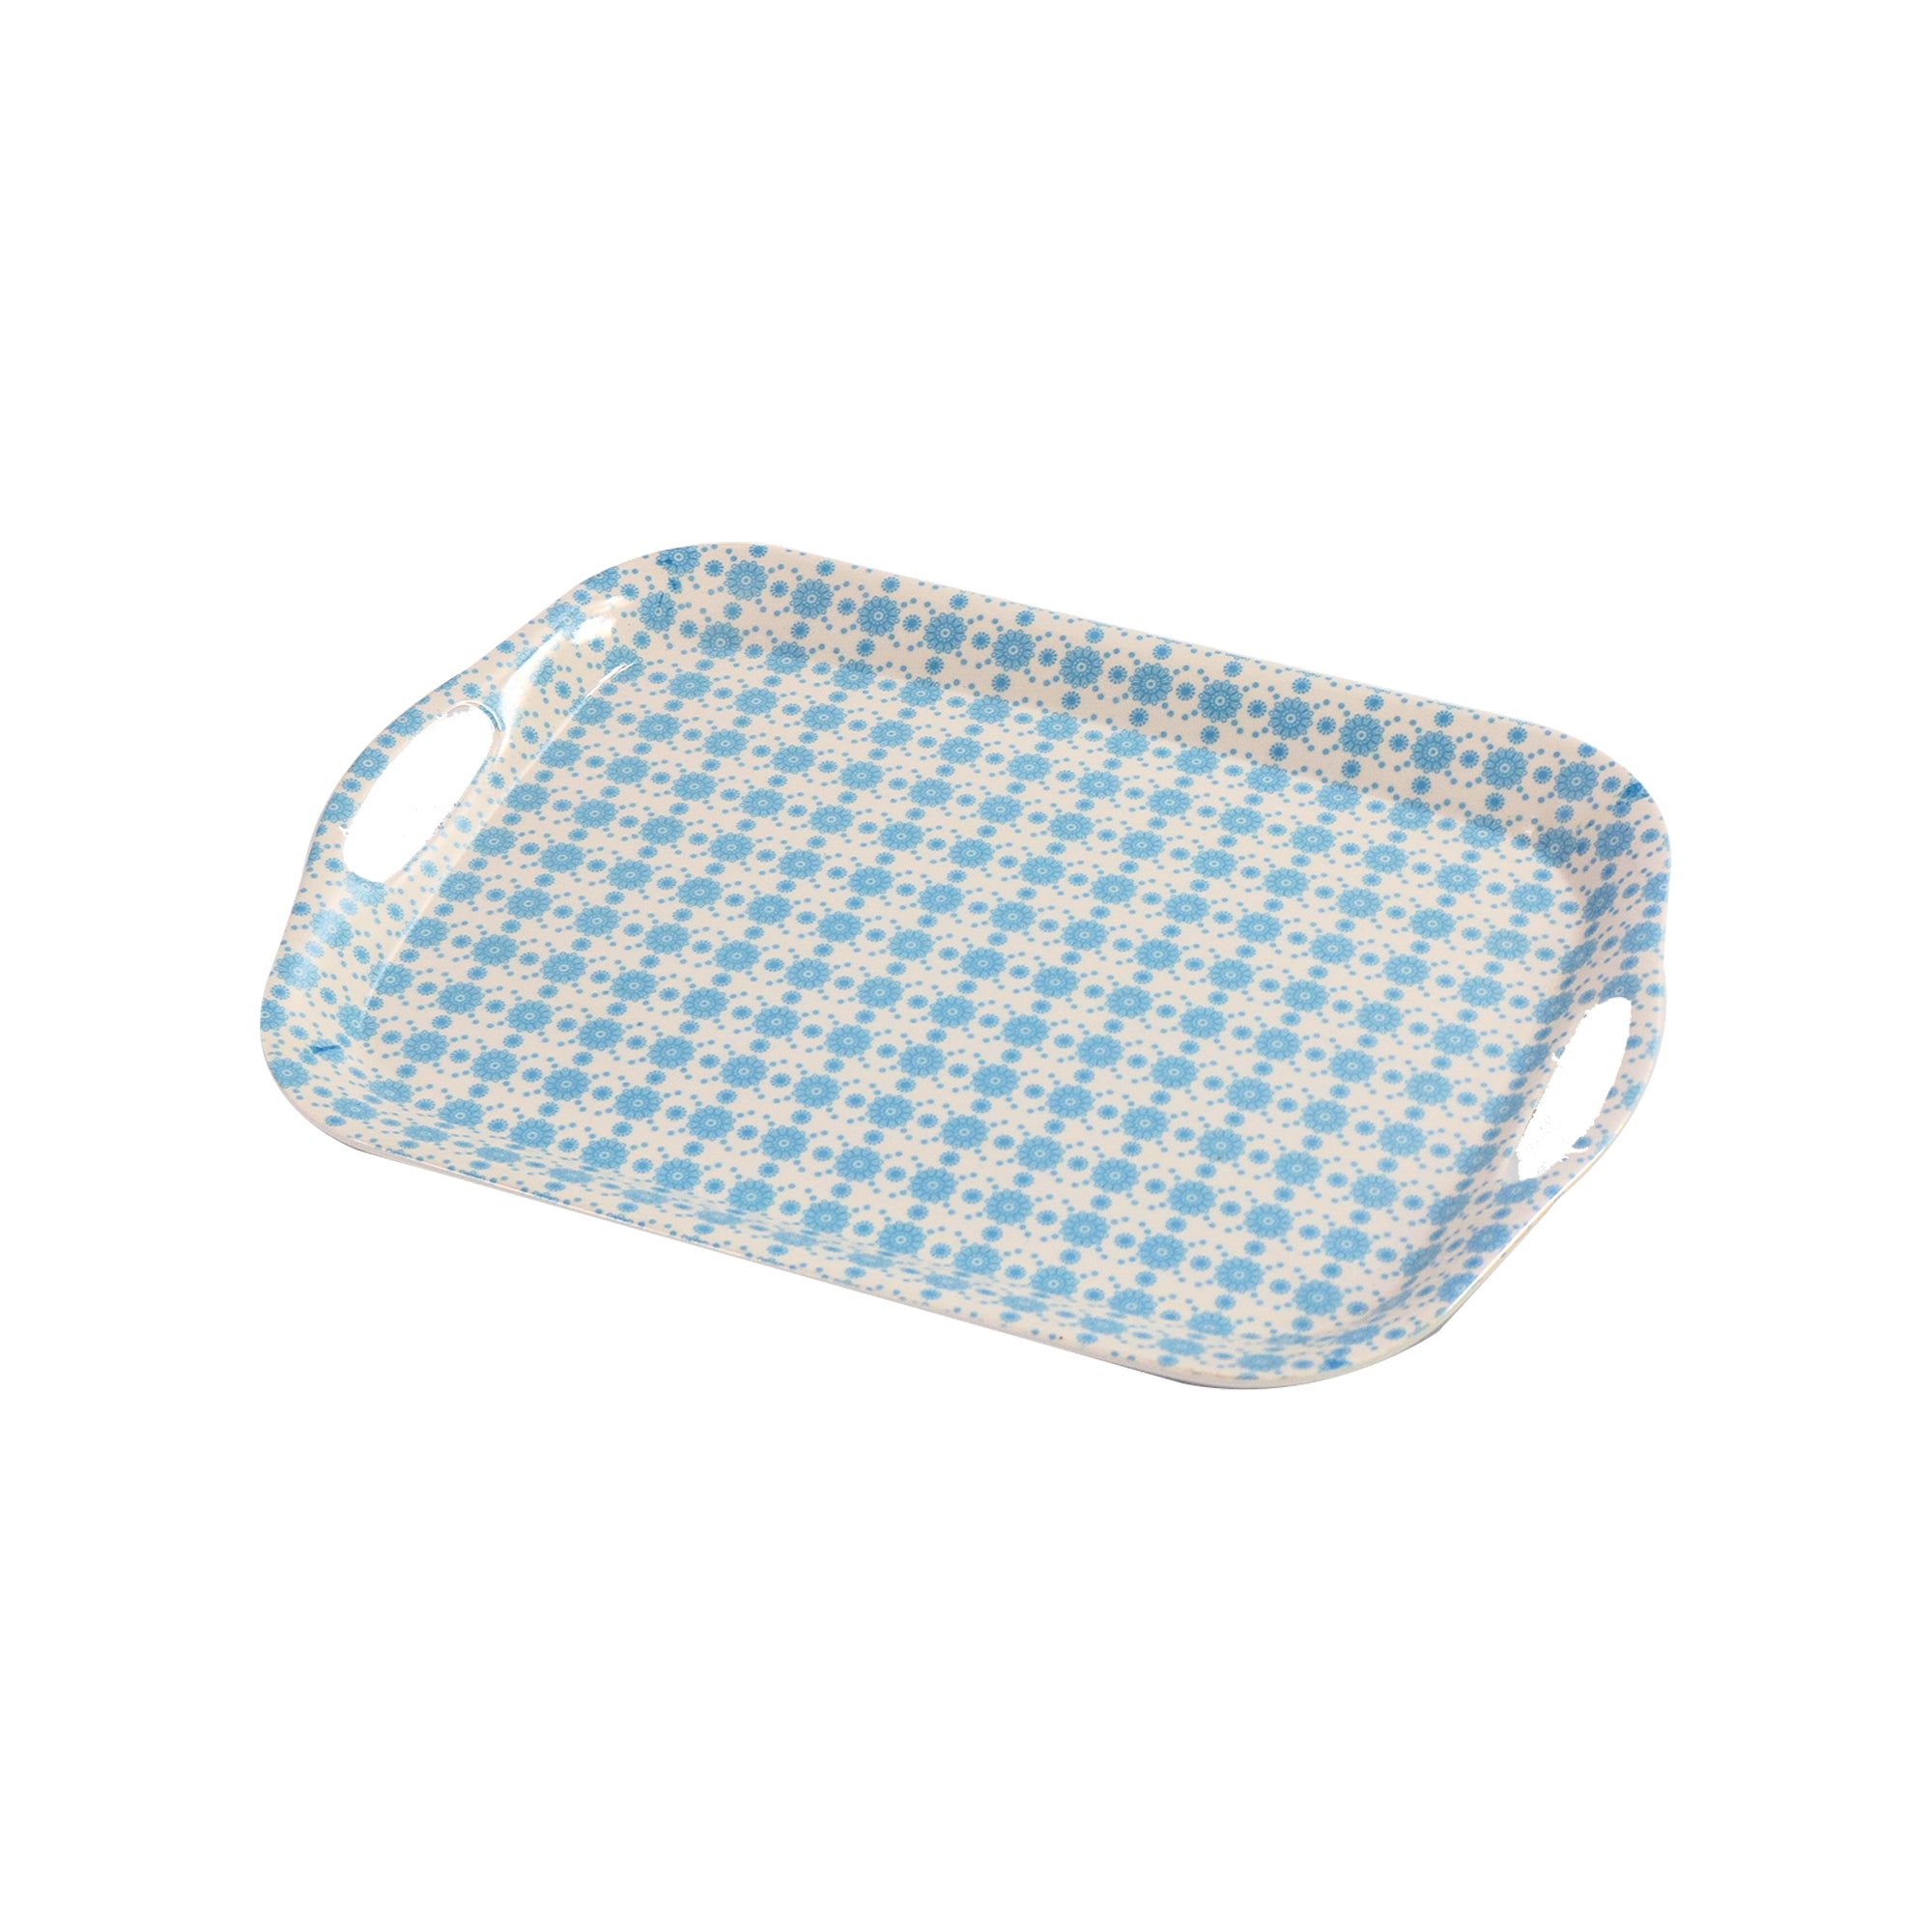 Melamine Serving Tray 36x25cm with Handle